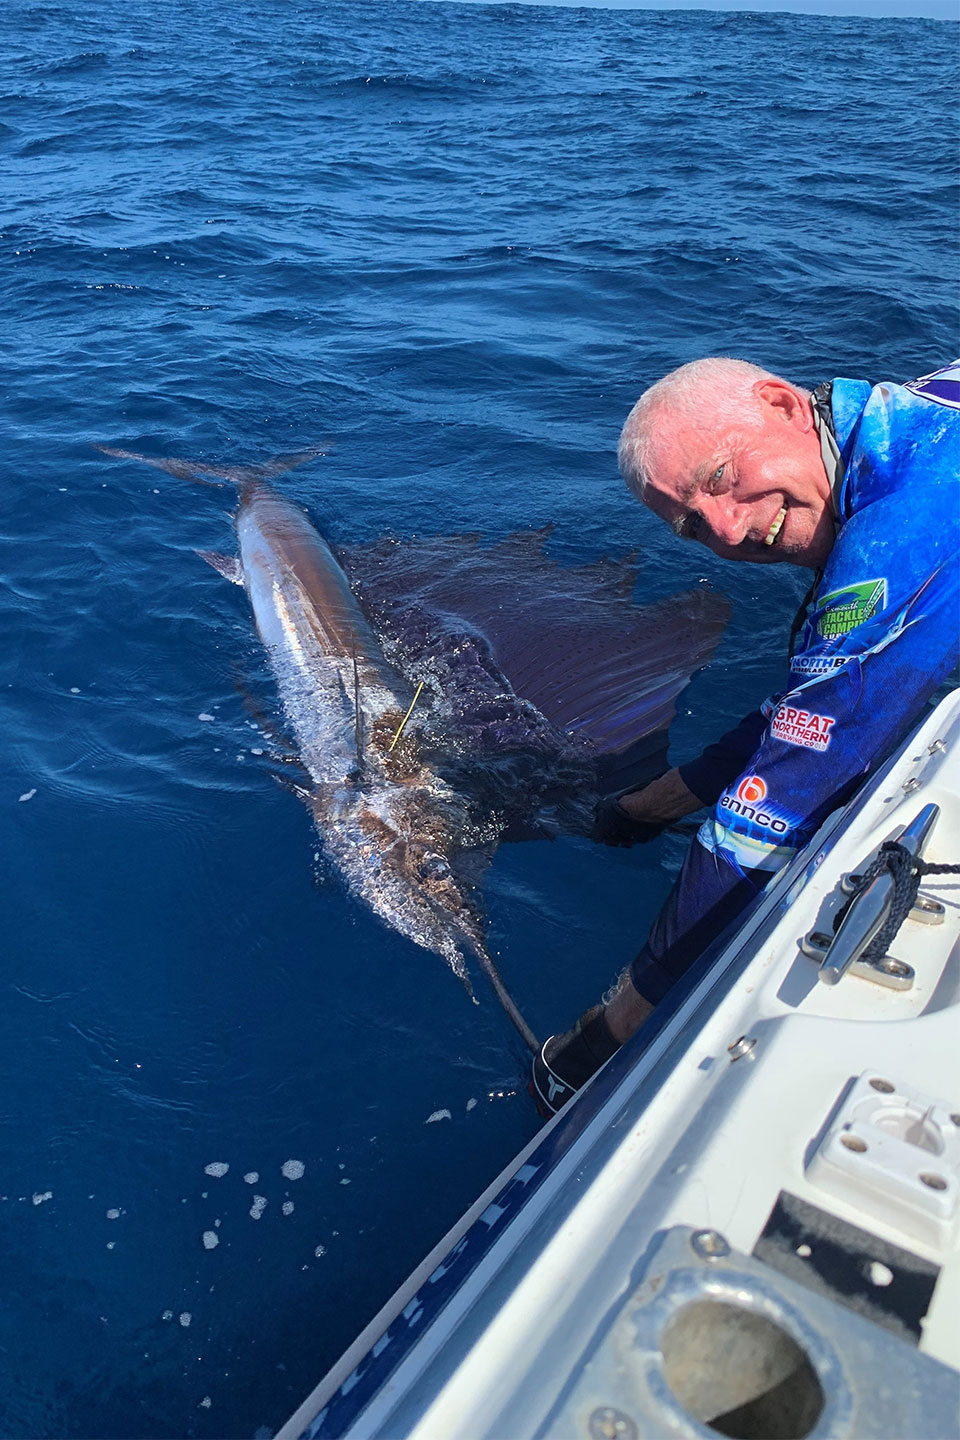 Brian Edwards leaning over boat to land a huge sailfish off the coast of Western Australia